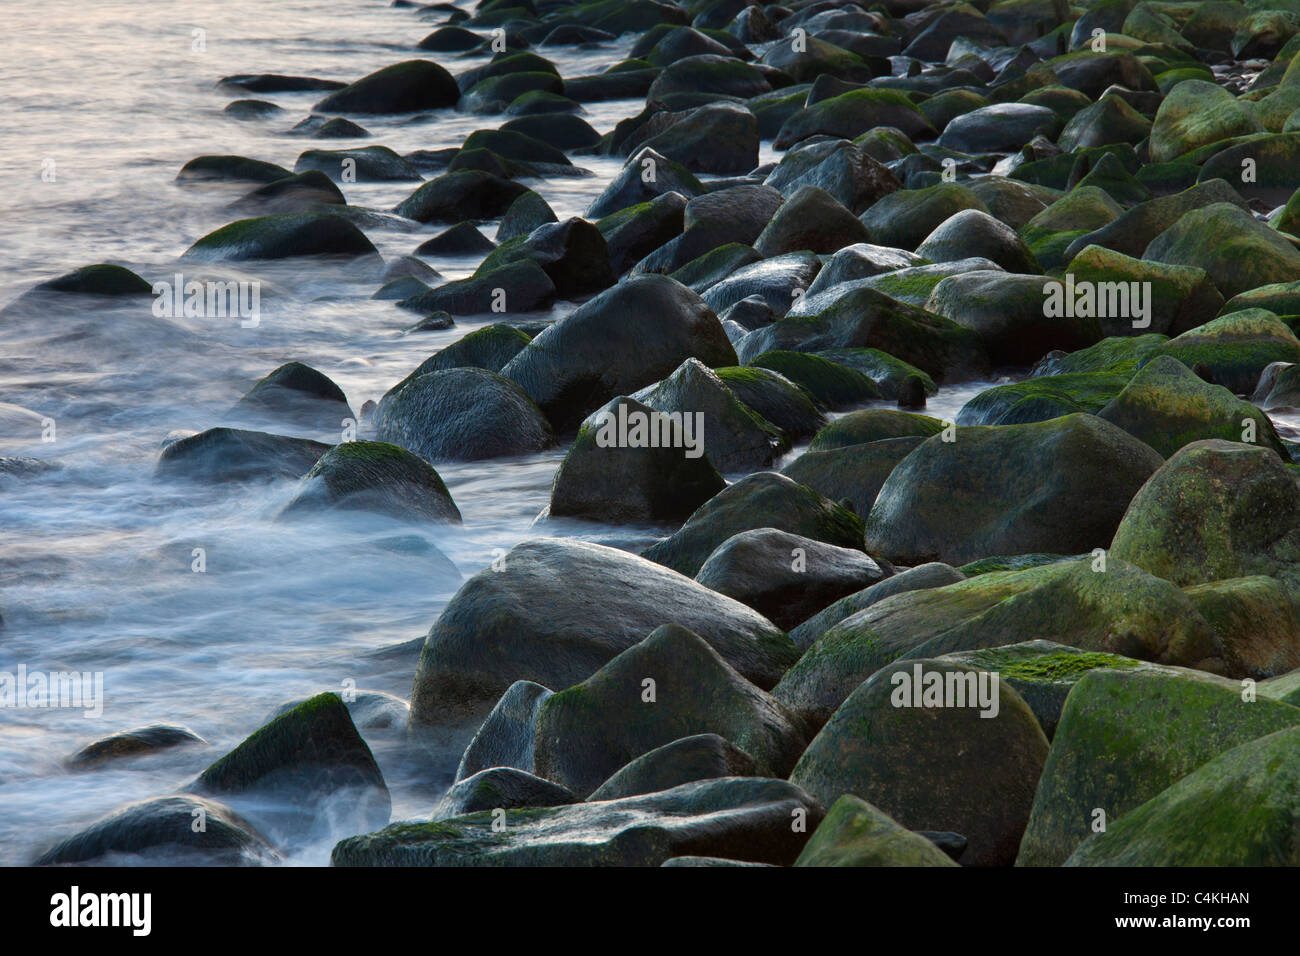 Rocks covered in seaweed on beach in the surf at low tide, Germany Stock Photo